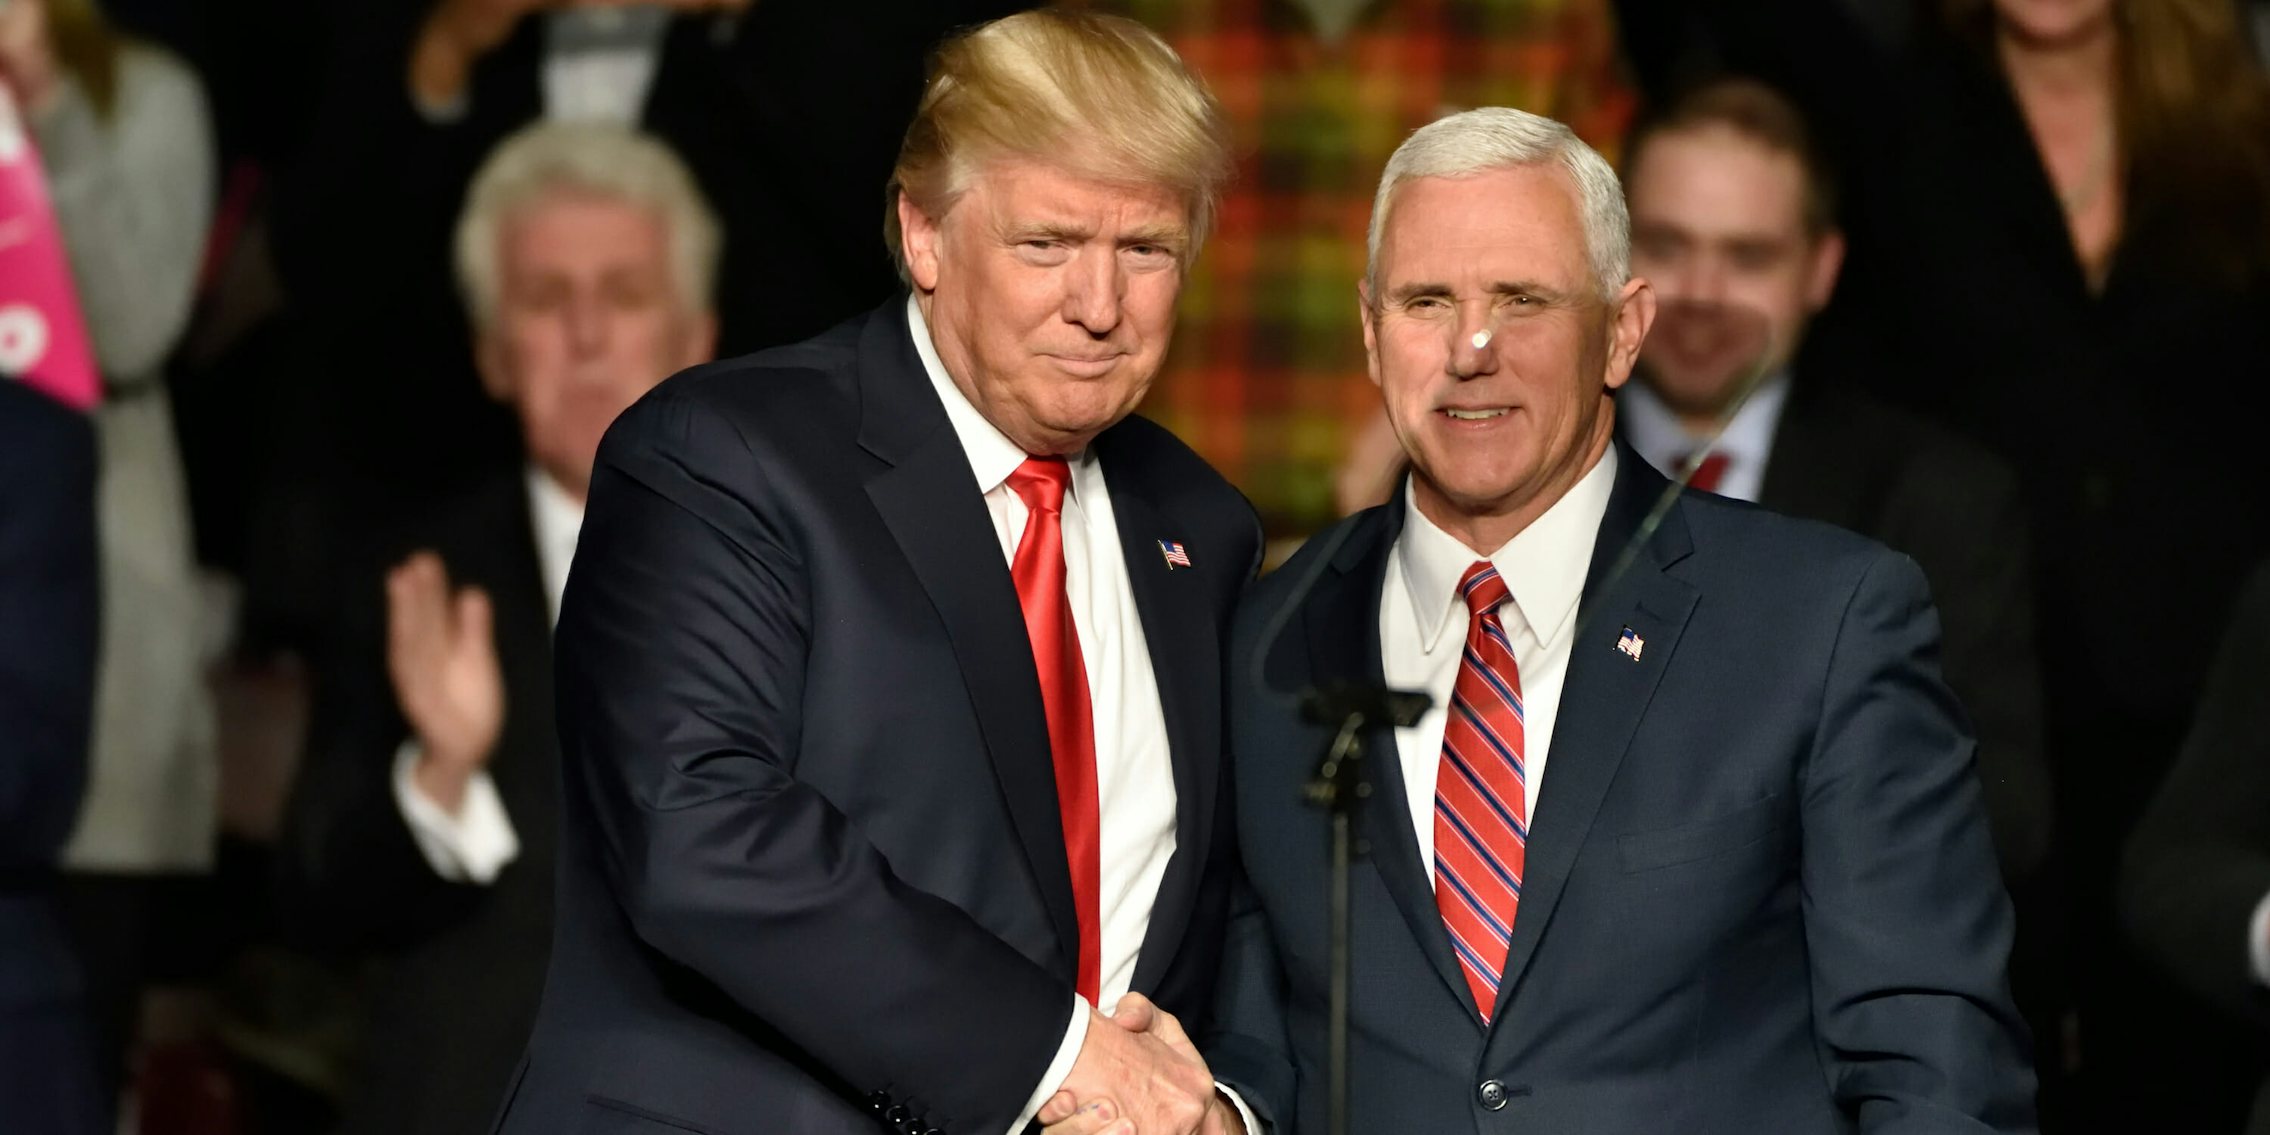 Donald Trump and Mike Pence Shaking Hands at a Rally